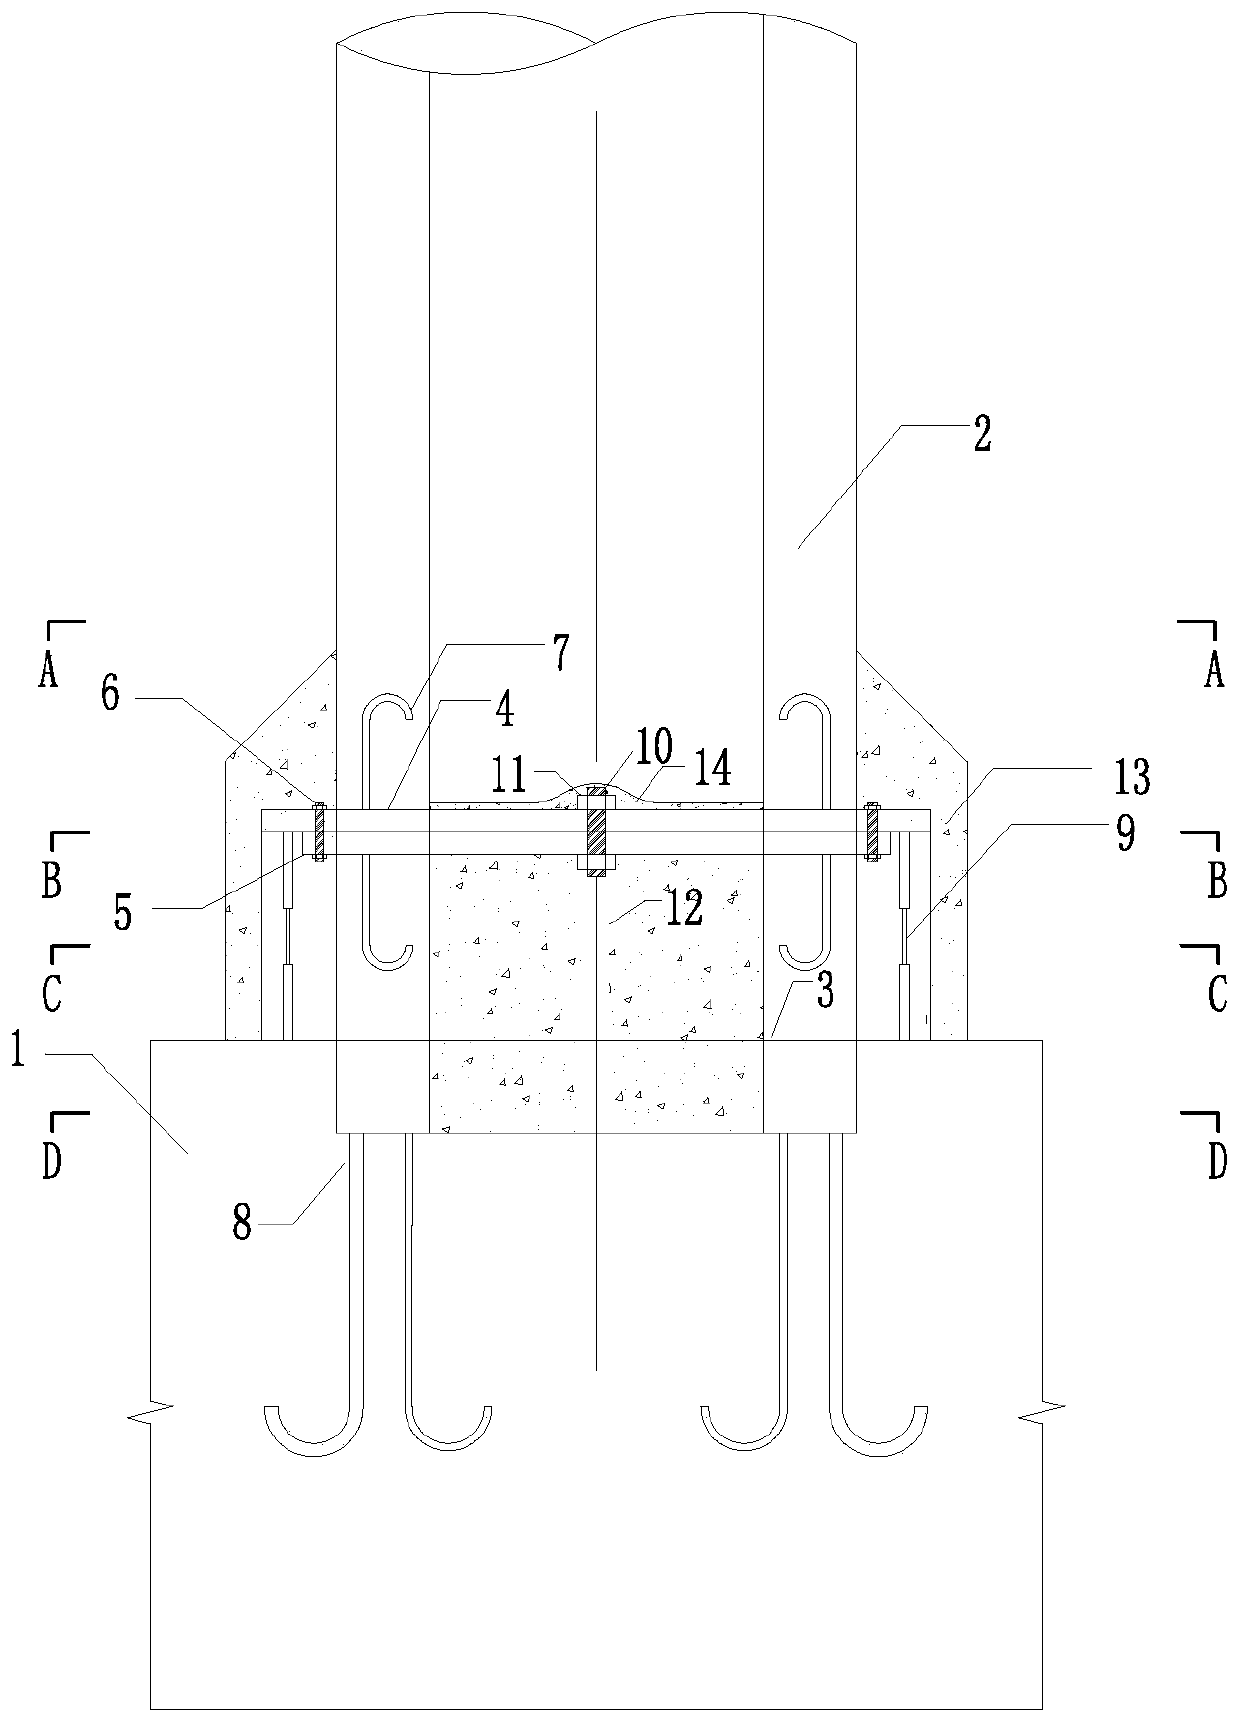 Connecting mode and structure of reinforced concrete hollow pipe pier joints based on steel plate connection